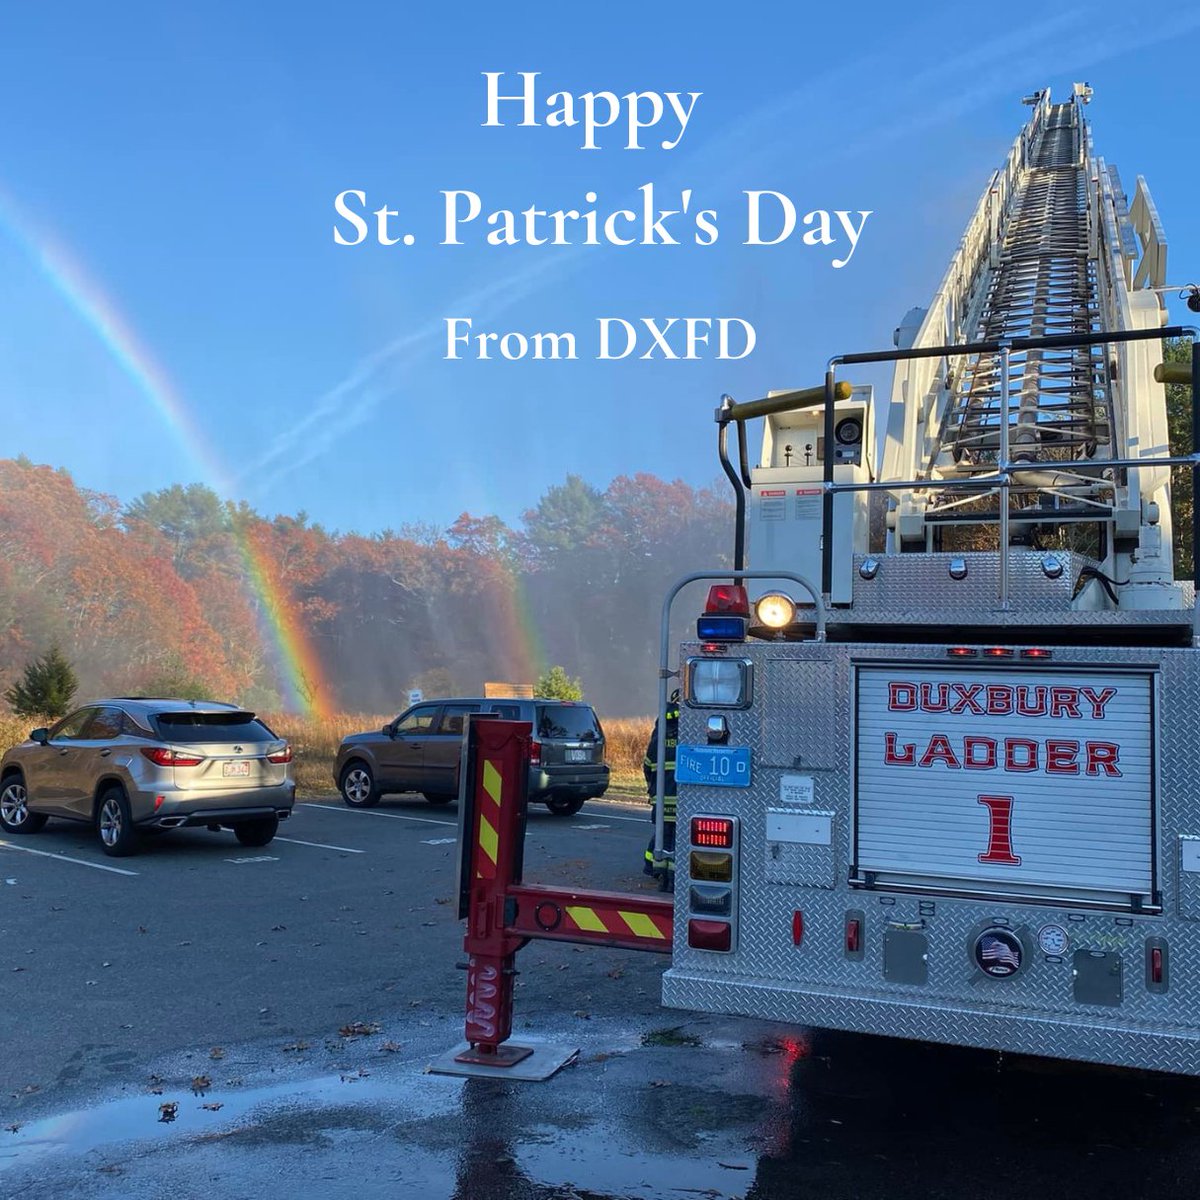 Happy St. Patrick’s Day! ⁠ Remember to celebrate responsibly. ⁠
⁠
#dxfd #stpatricksday #firedepartment